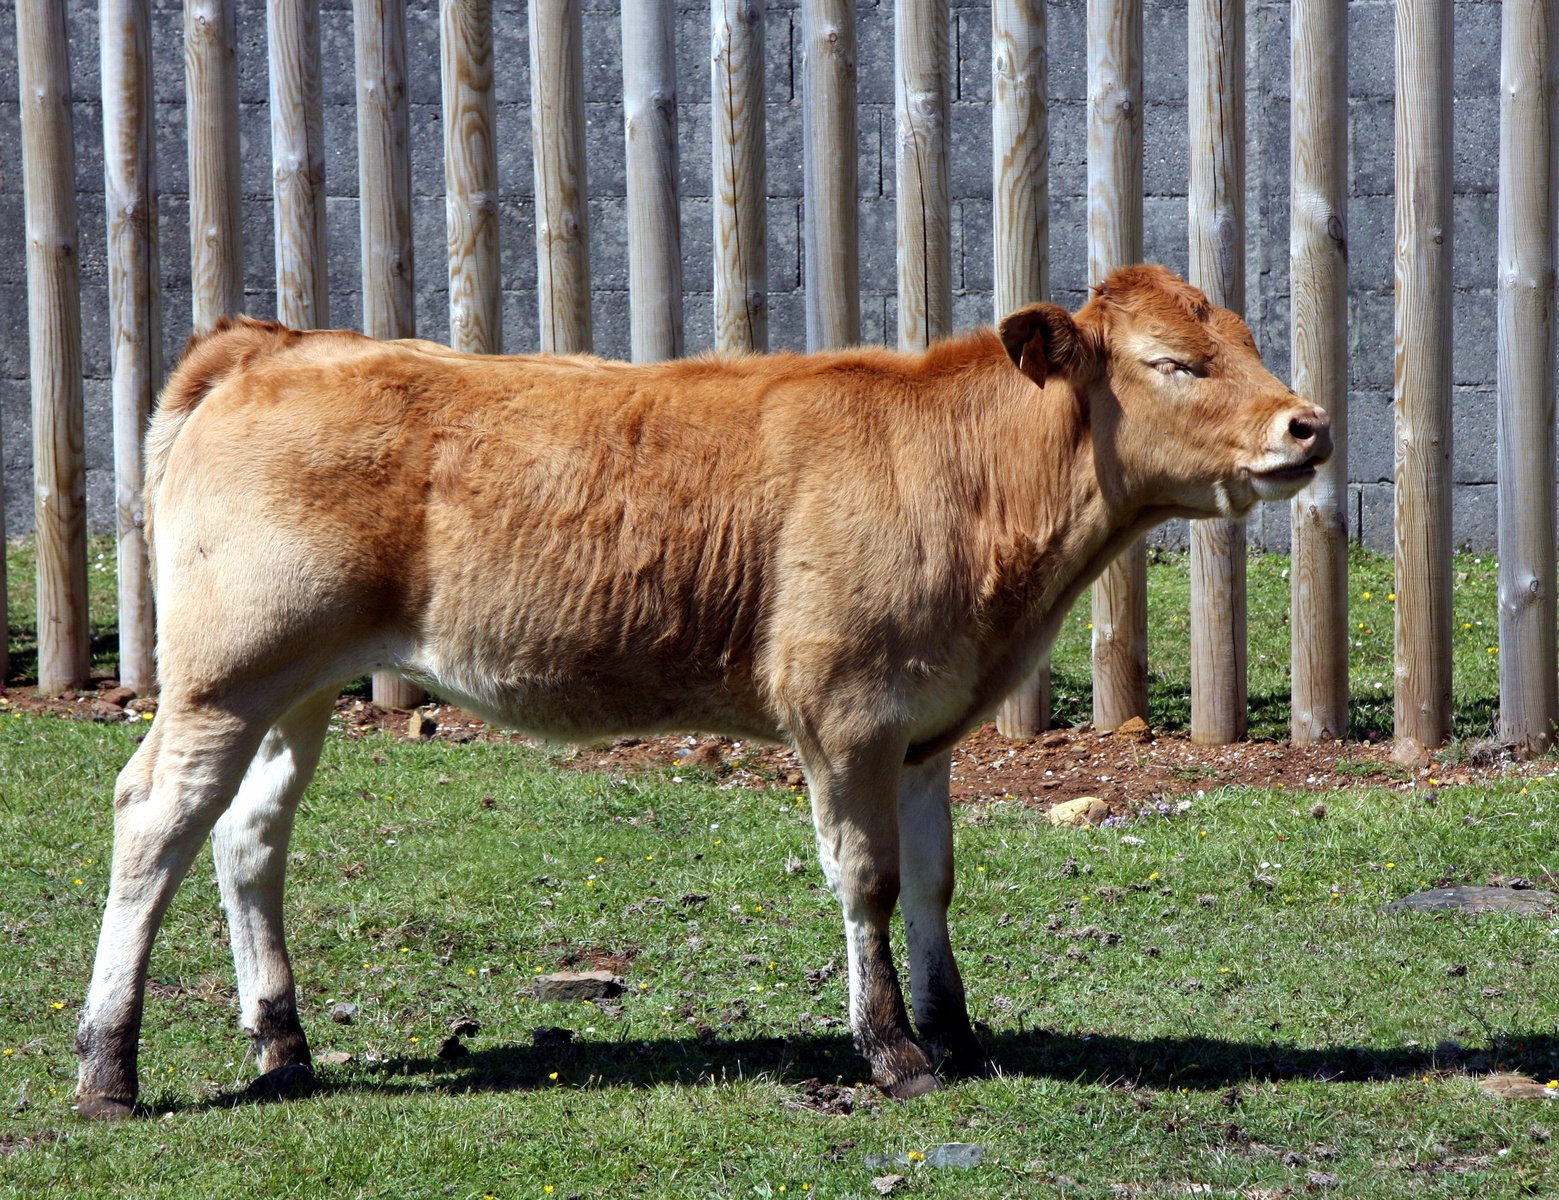 a brown cow standing in the grass by a fence